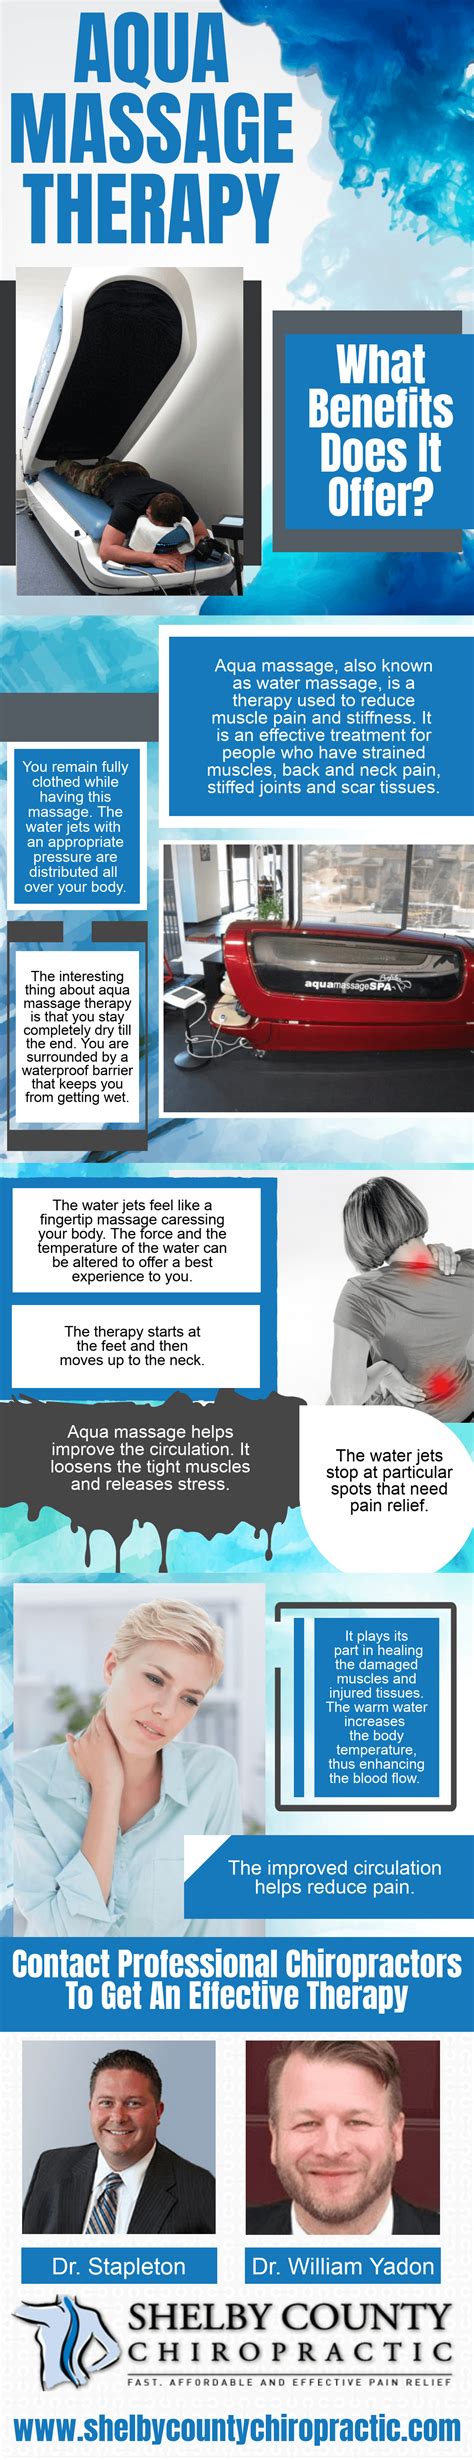 Aqua Massage Therapy What Benefits Does It Offer Infographic Shelby County Chiropractic